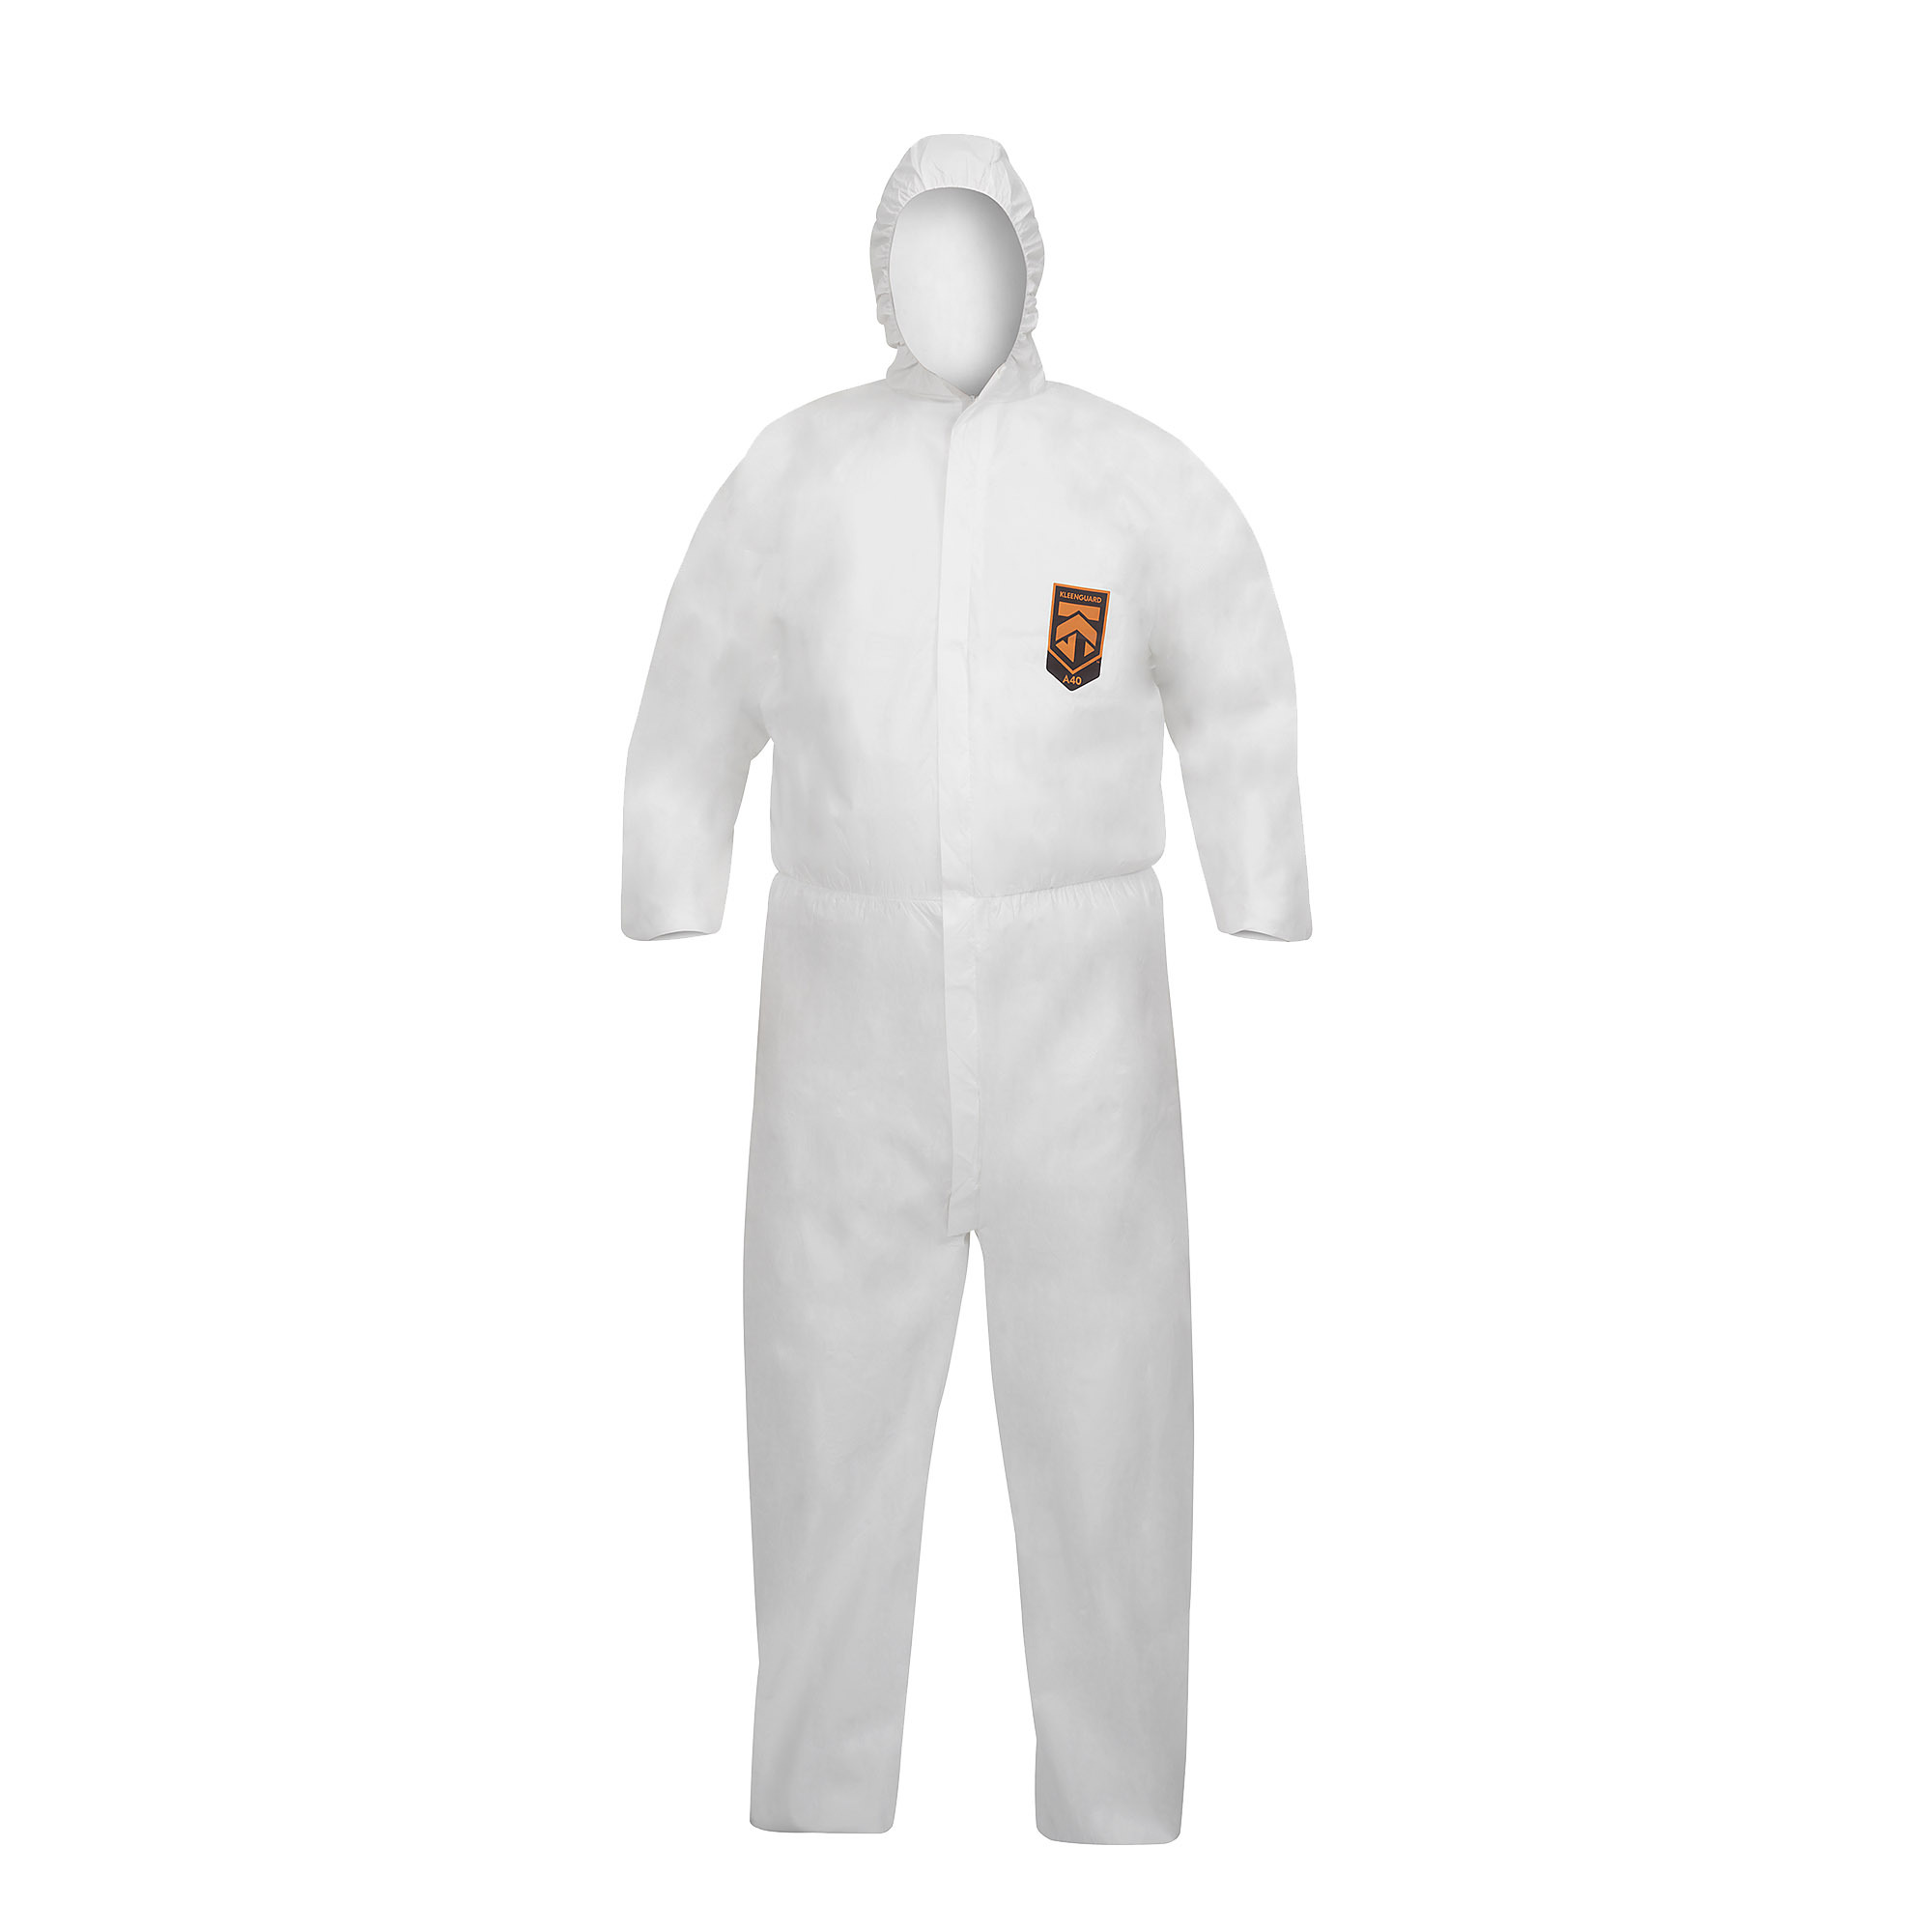 KleenGuard® A40 Liquid & Particle Protection Hooded Coveralls (97920), Large White Coveralls, 25 Coveralls/Case, 1 Coverall / Pack (25 coveralls)